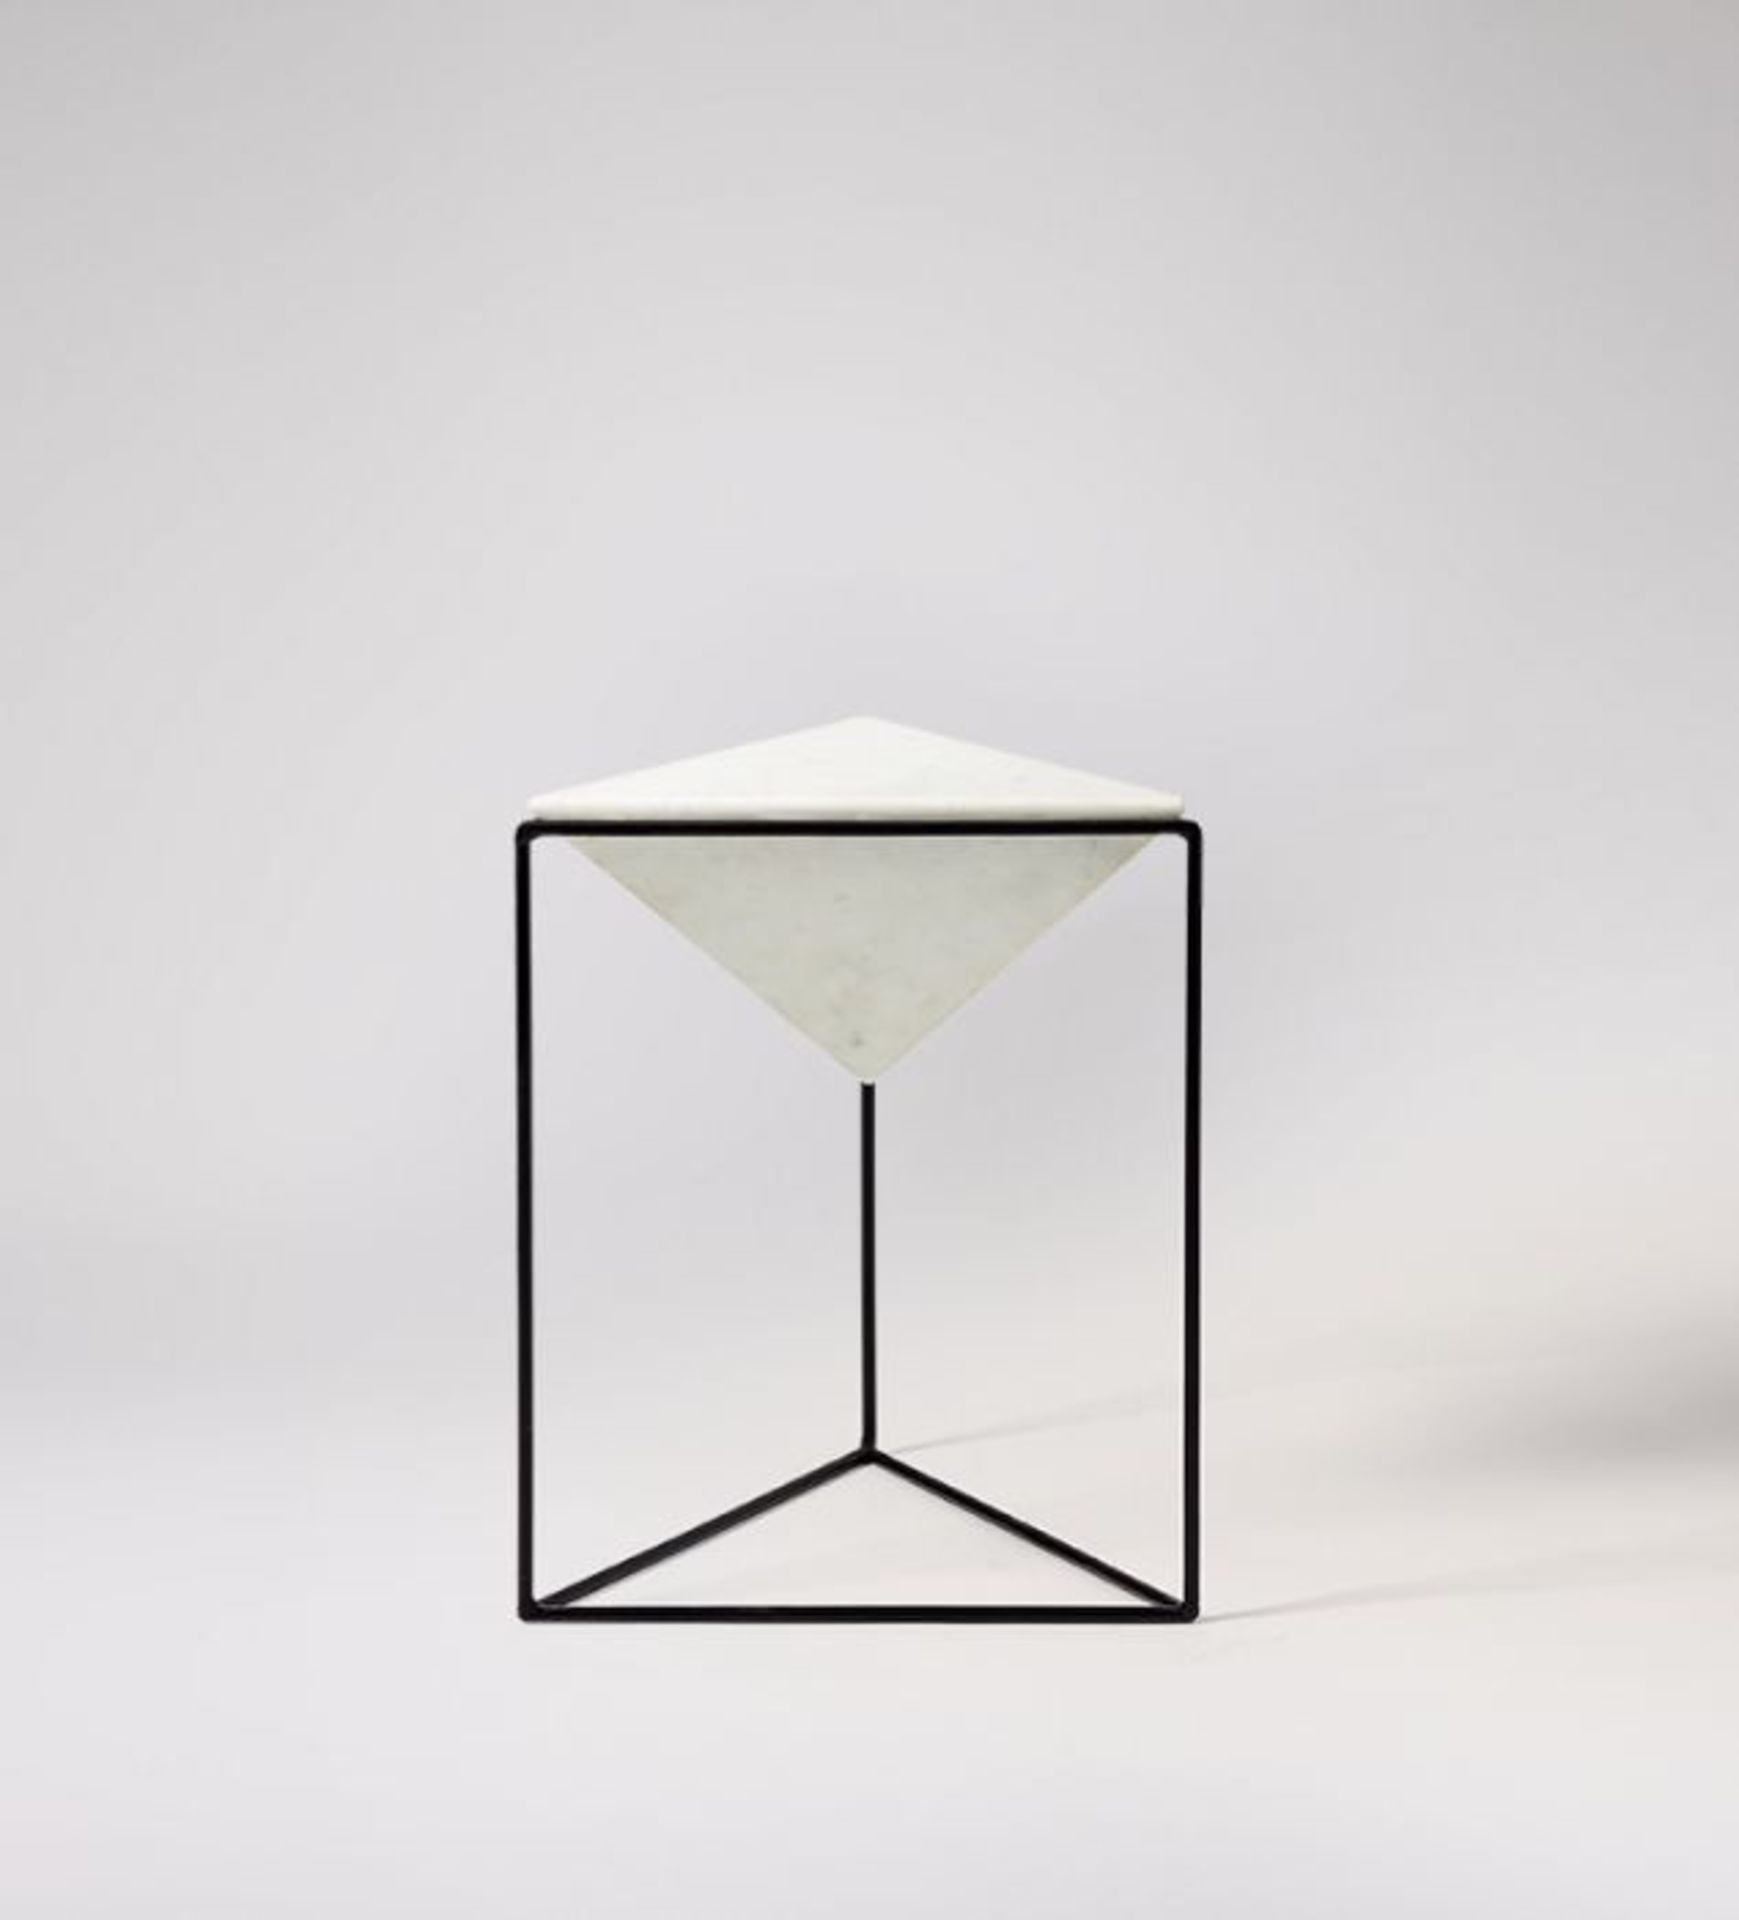 Swoon Cairo Side Table in White Marble RRP £229 SKU SWO-GW-cairosidtabblamar-A+ PID SWO-GW-19052 - Image 3 of 6